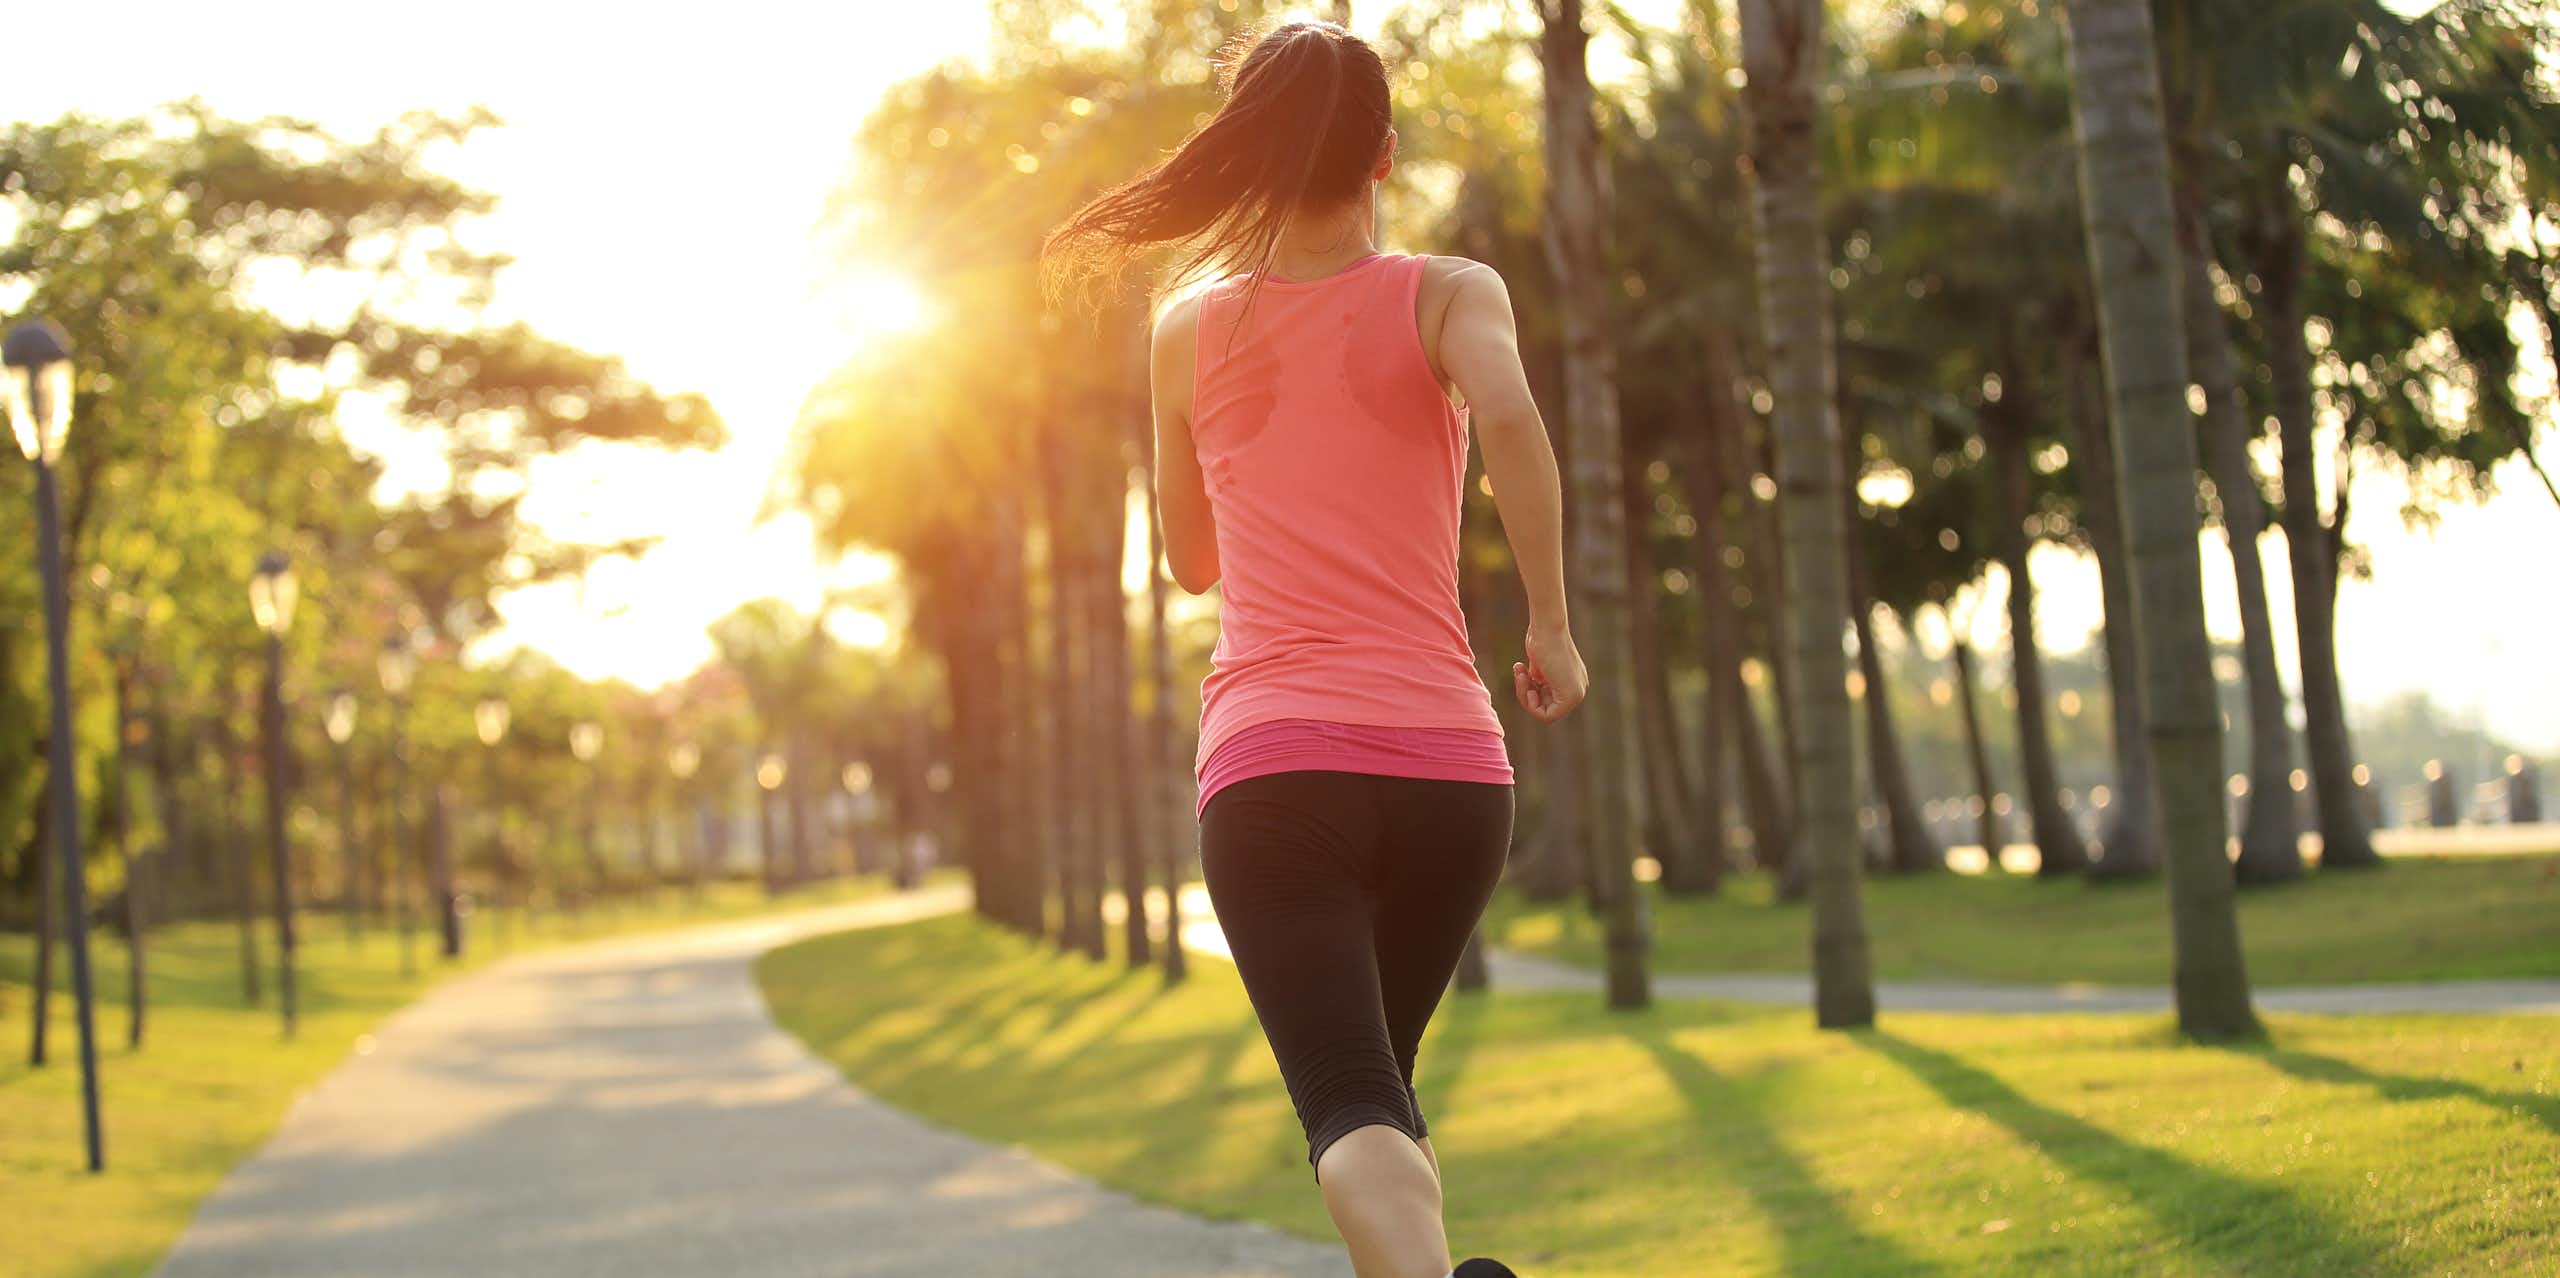 A woman goes for a run in the park at sunrise.